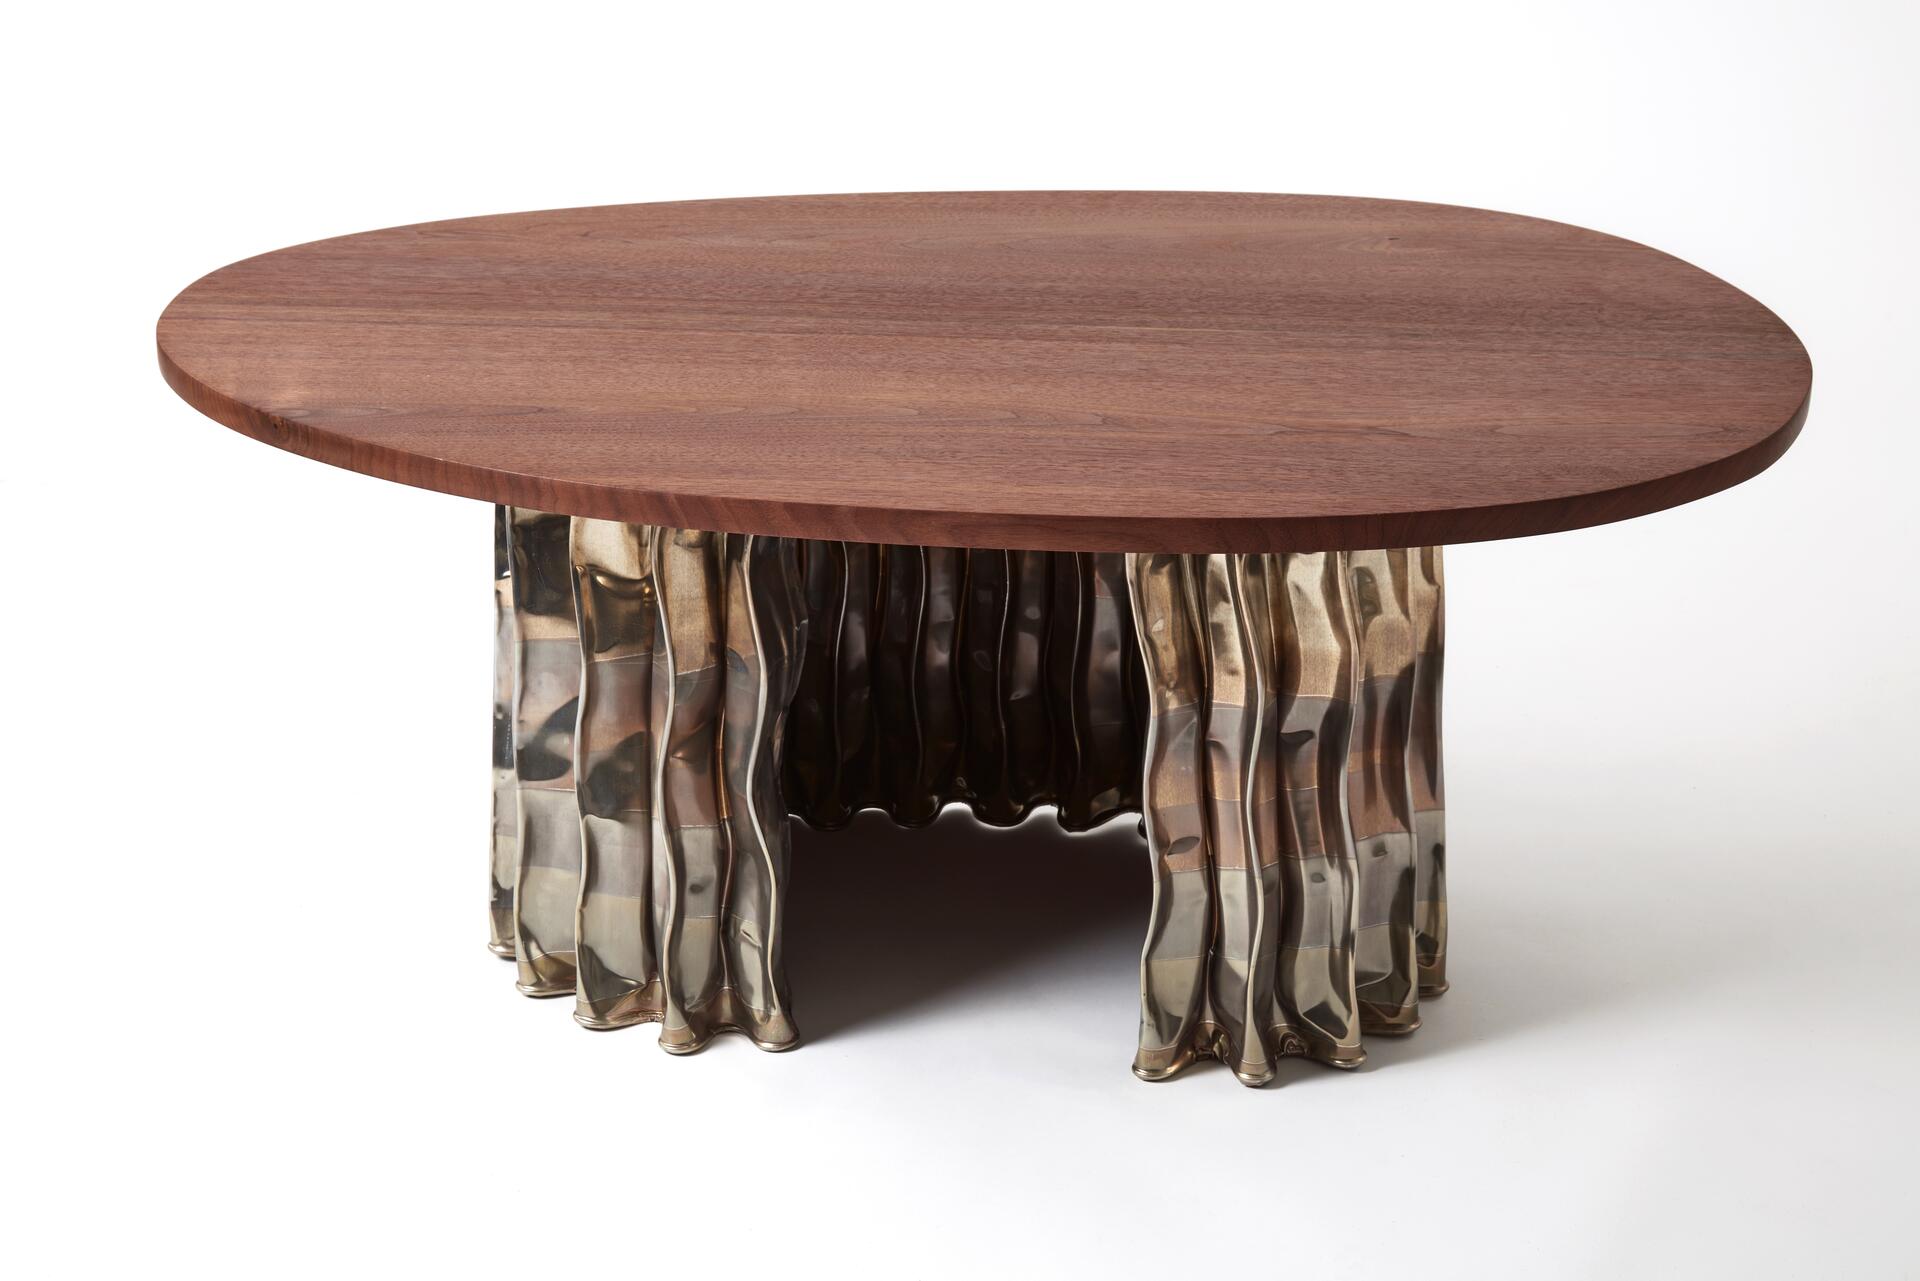 A round coffee table with a smooth walnut top and a unique, wavy metallic base. The base features a reflective surface with an elegant, flowing design, creating an artistic contrast with the wooden tabletop.